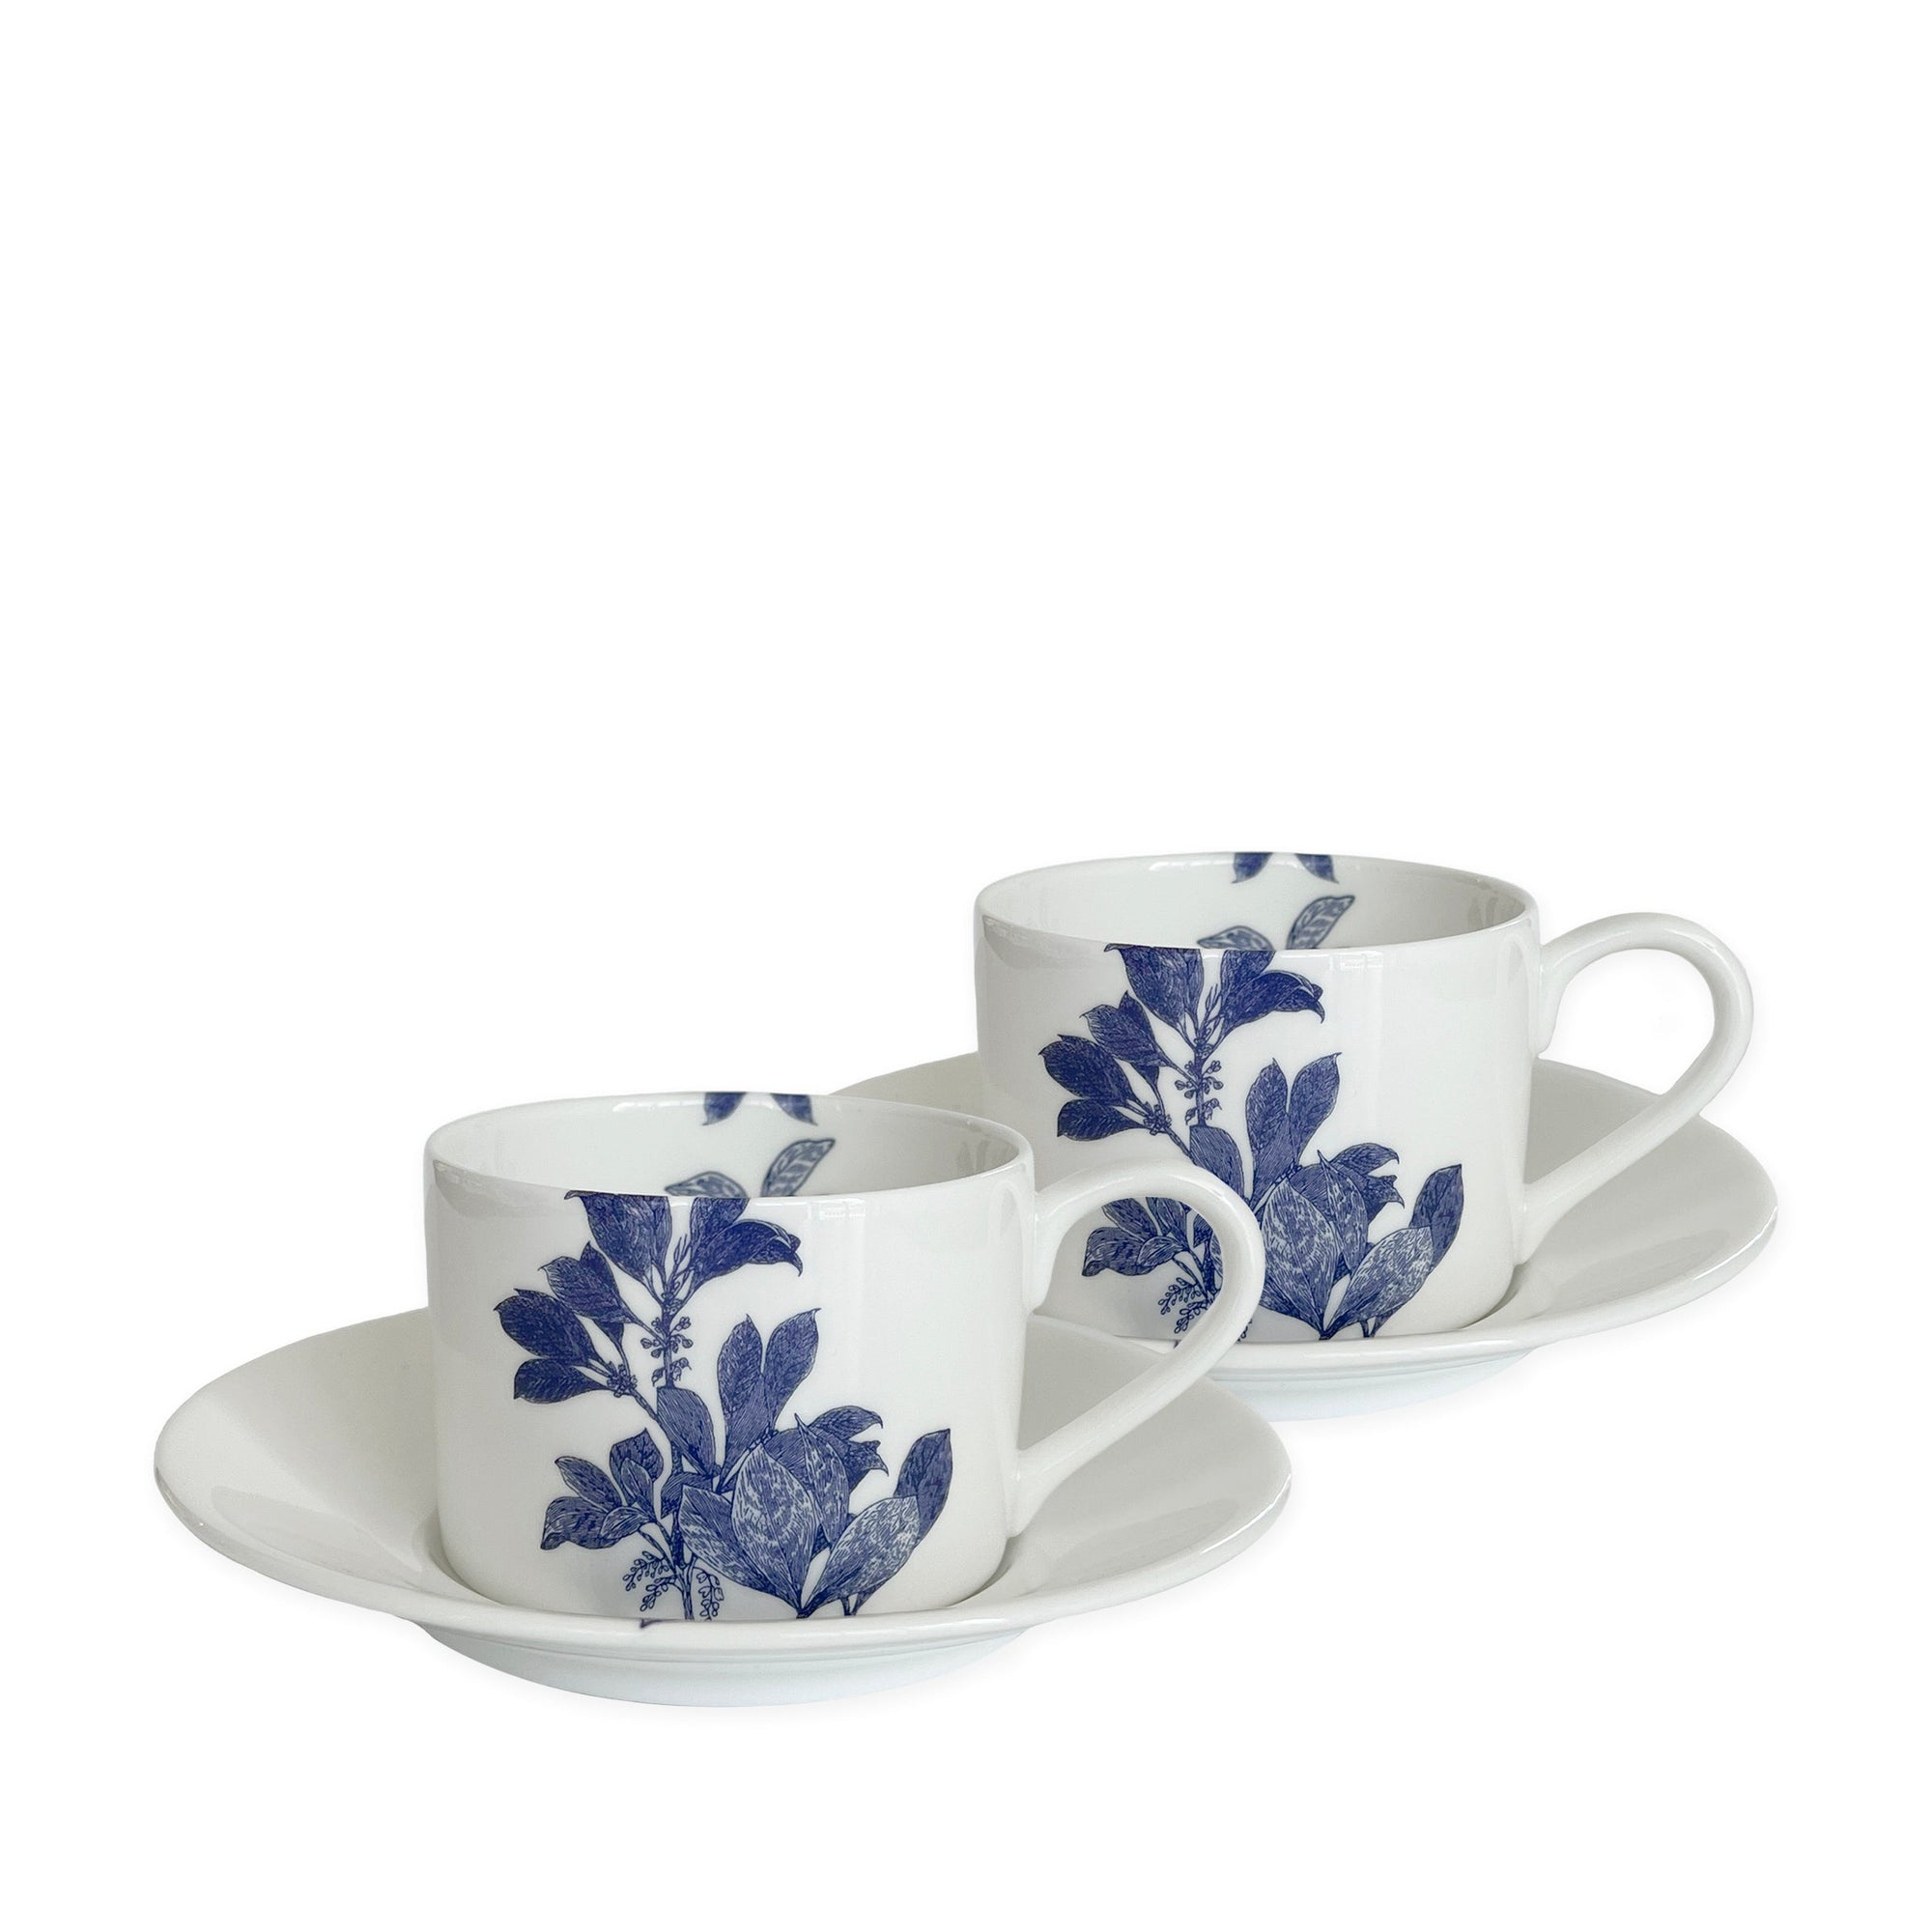 A pair of Blue Arbor Cups & Saucers Set/2 from Caskata Artisanal Home, perfect for tea or coffee enthusiasts looking to add some stylish blue and white dinnerware to their collection.